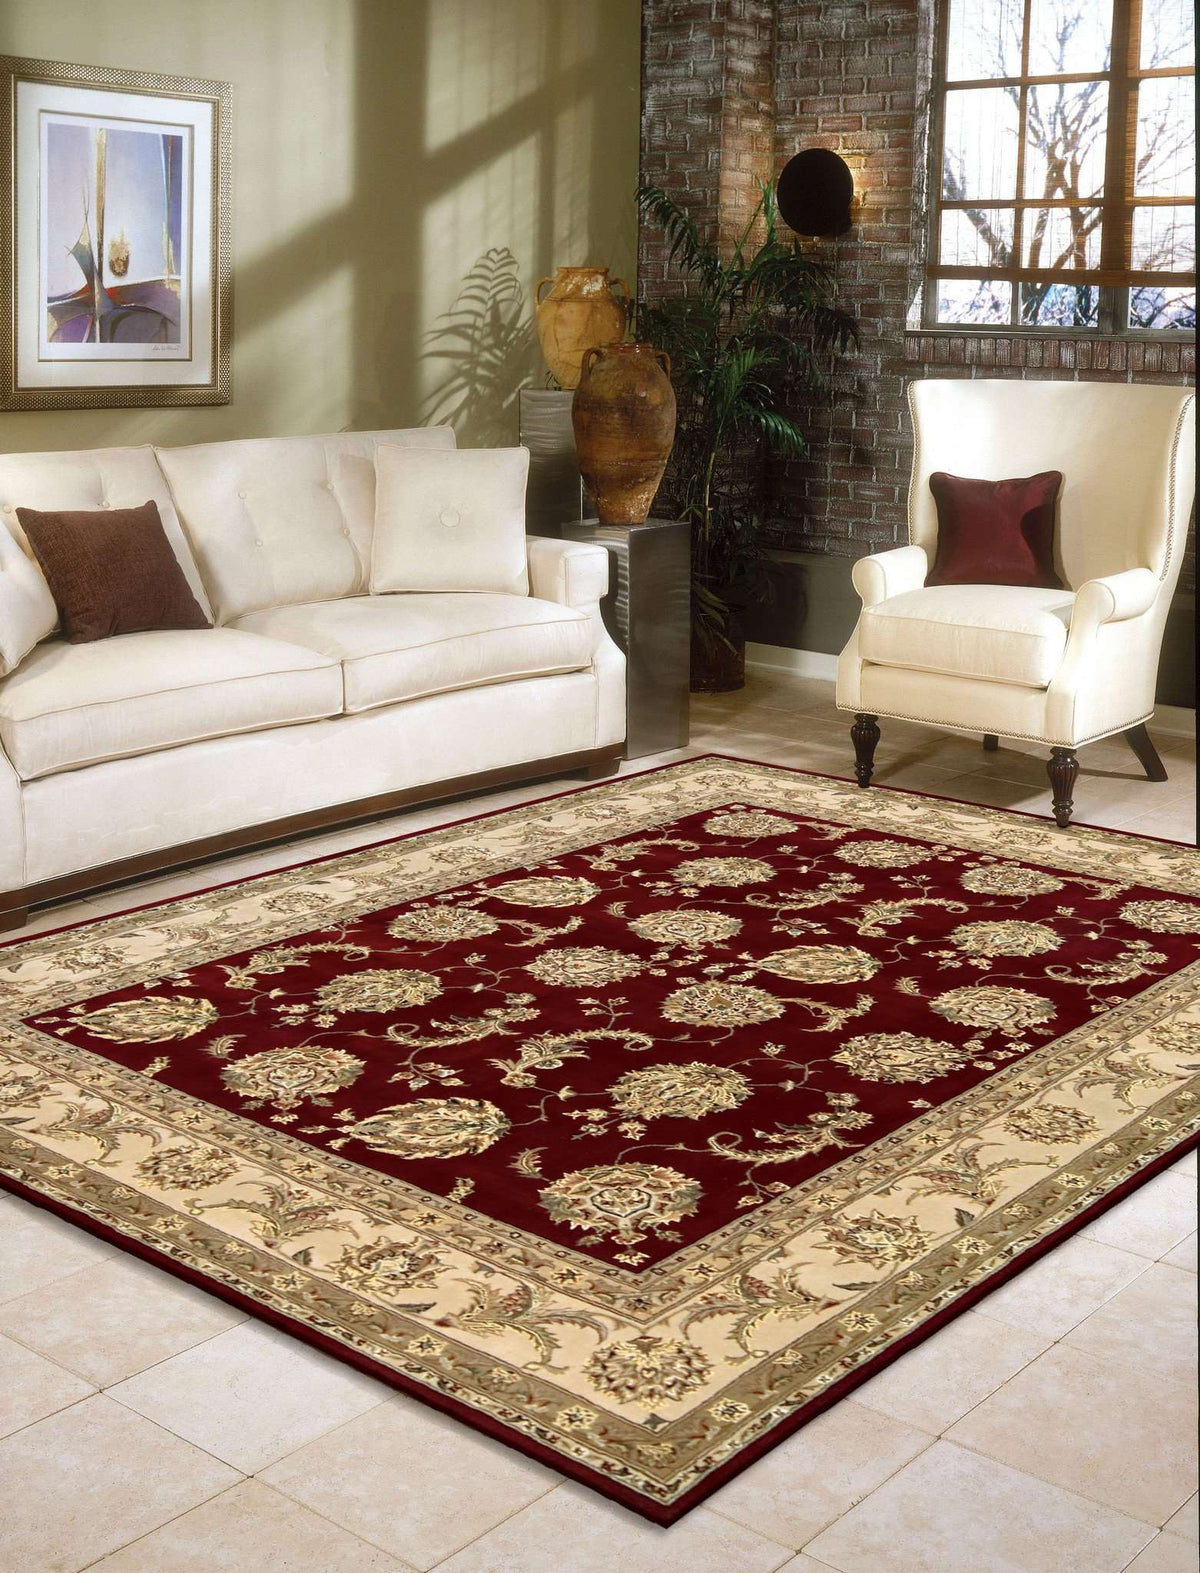 Nourison 2000 2022 Lacquer Rug - Rug & Home